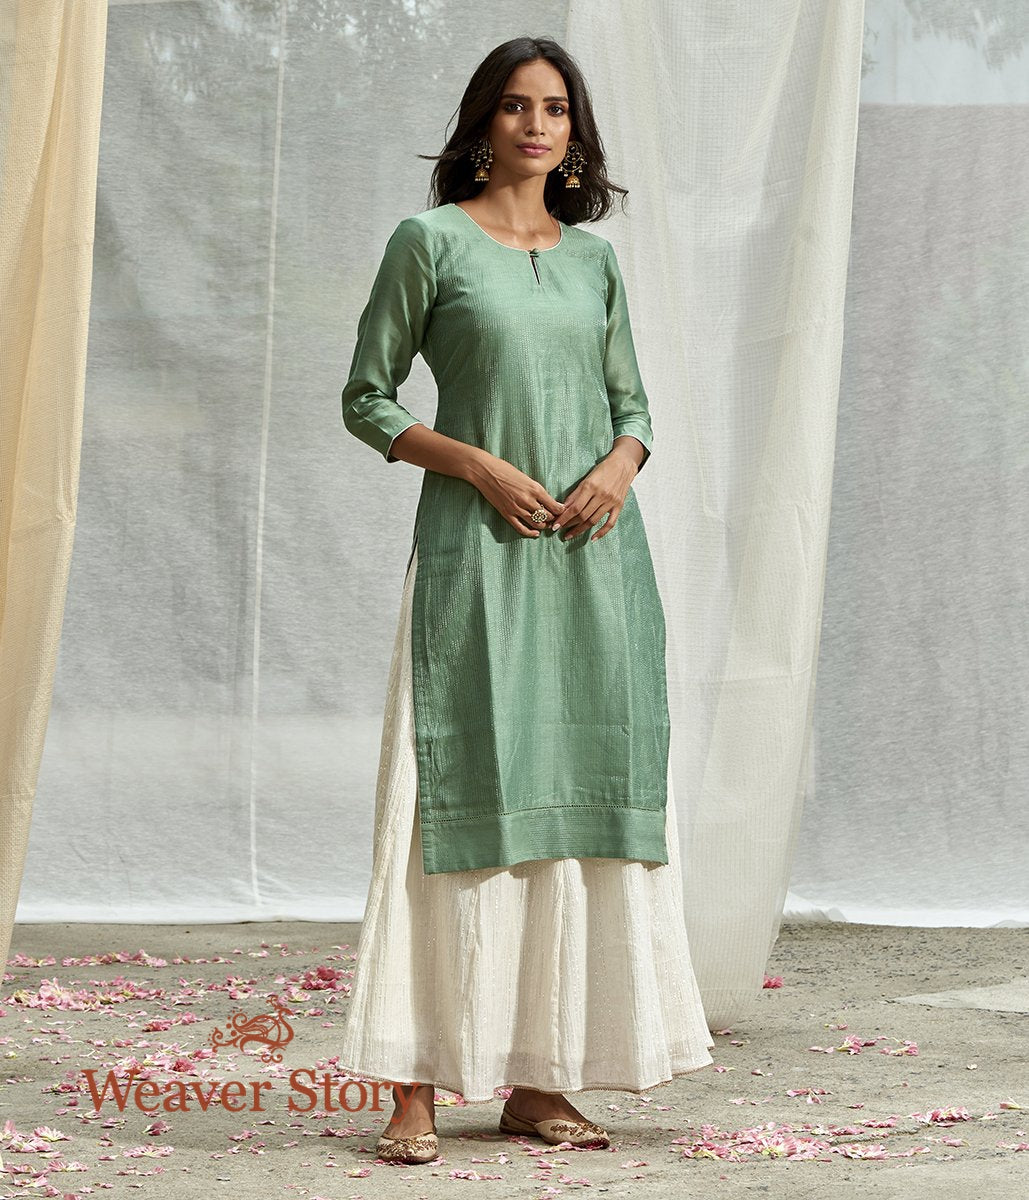 Handwoven_Sage_Green_Chanderi_Cotton_Silk_with_Tagai_Work_Tunic_with_White_Skirt_and_Dupatta_WeaverStory_02